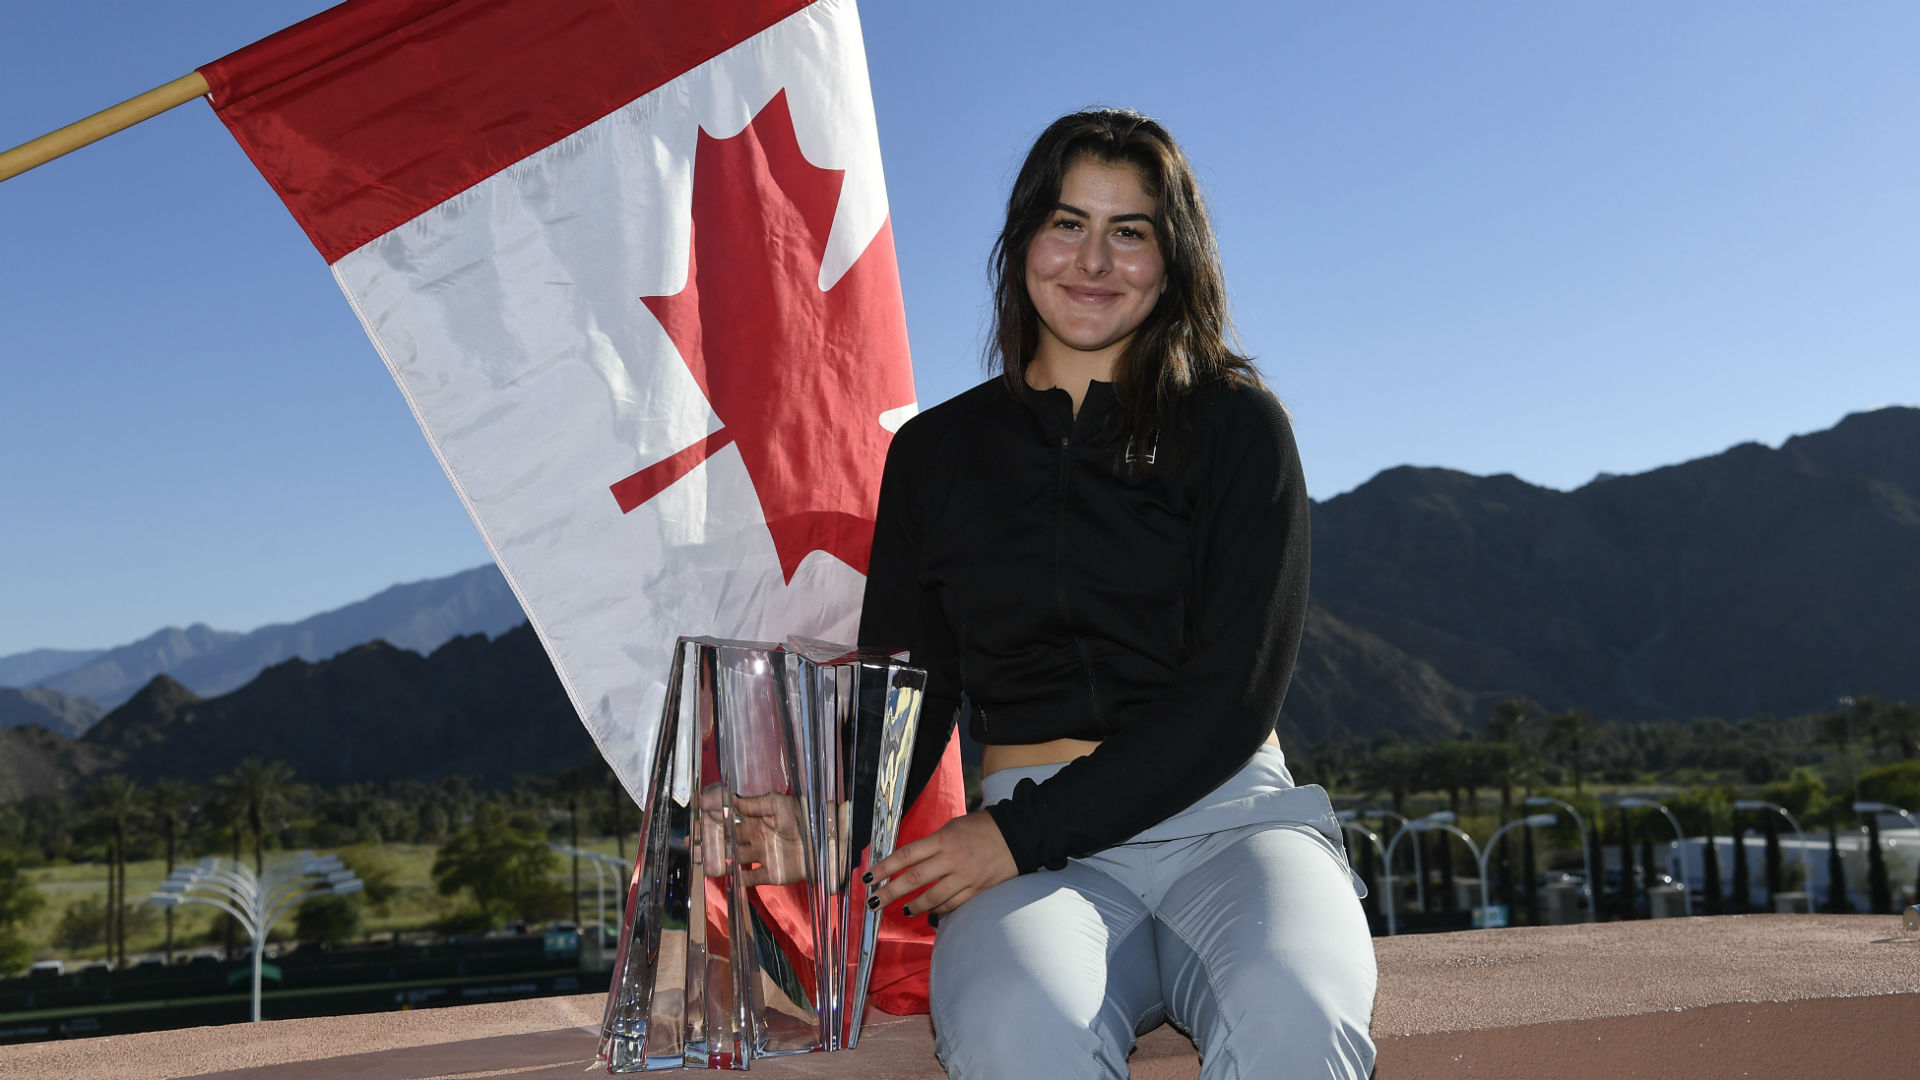 Andre Labelle says the "driven" Bianca Andreescu can go from strength to strength after making history at Indian Wells.